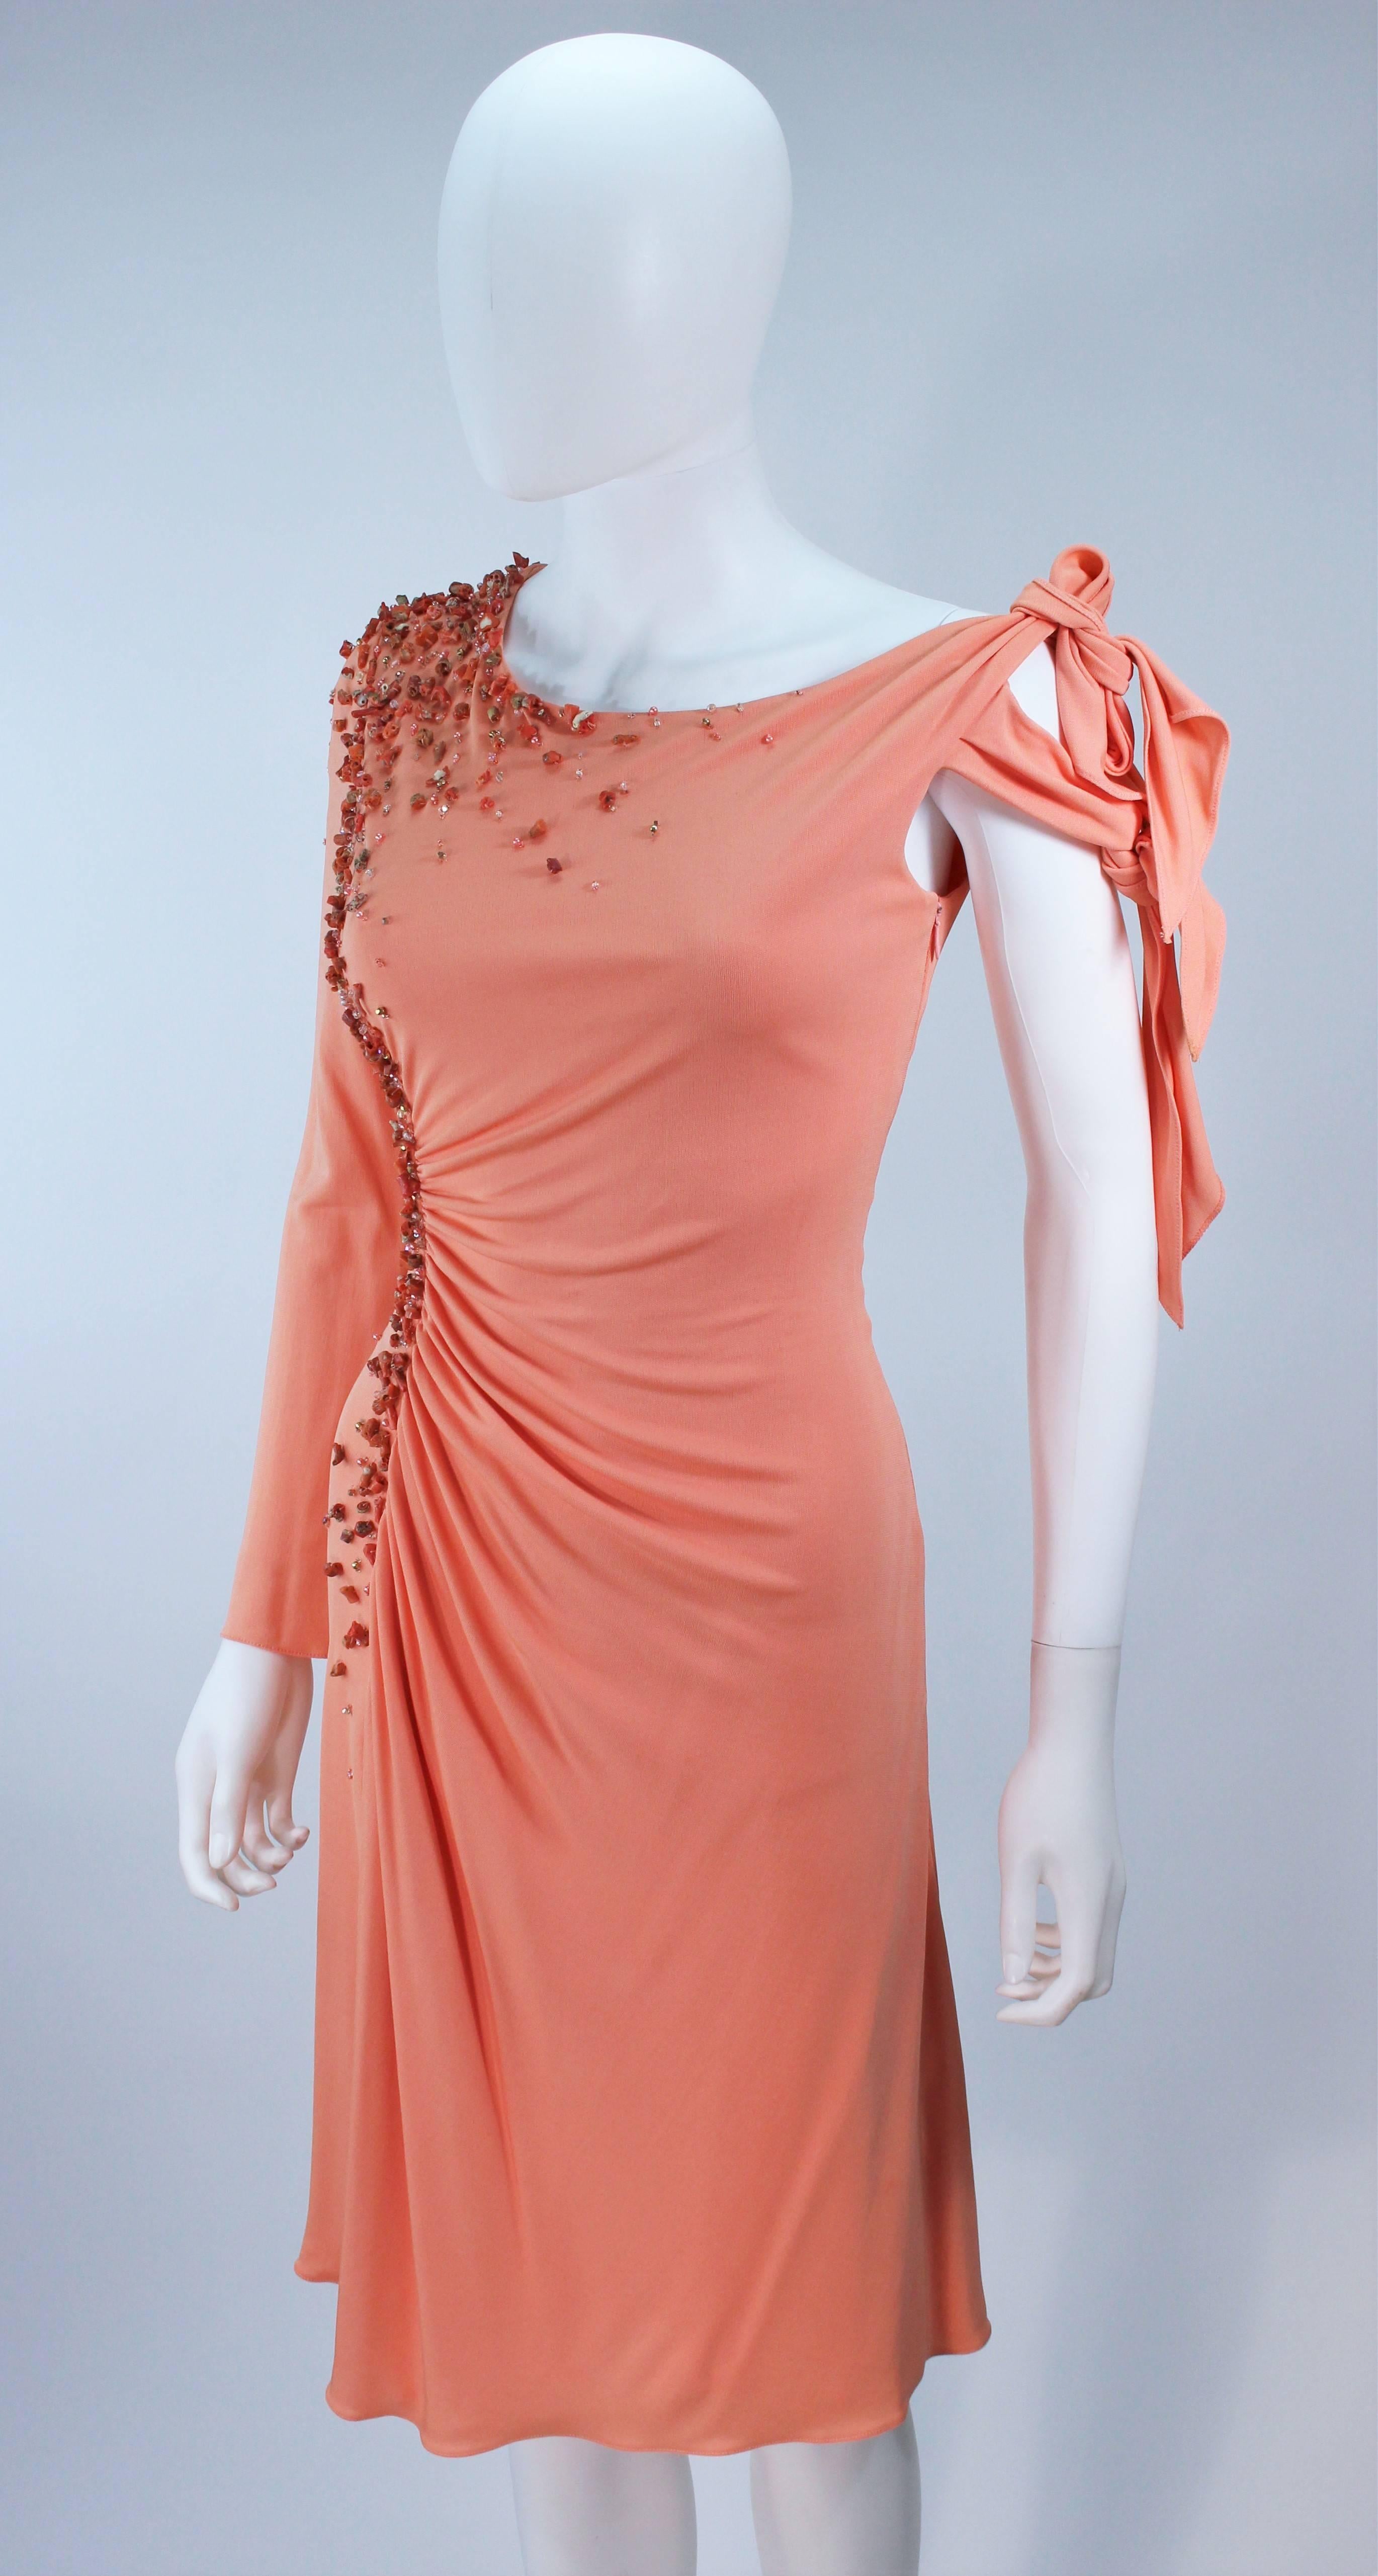 MARK ZUNINO Coral Jersey Cocktail Dress with Coral Beading Applique Size 6 8 In Excellent Condition For Sale In Los Angeles, CA